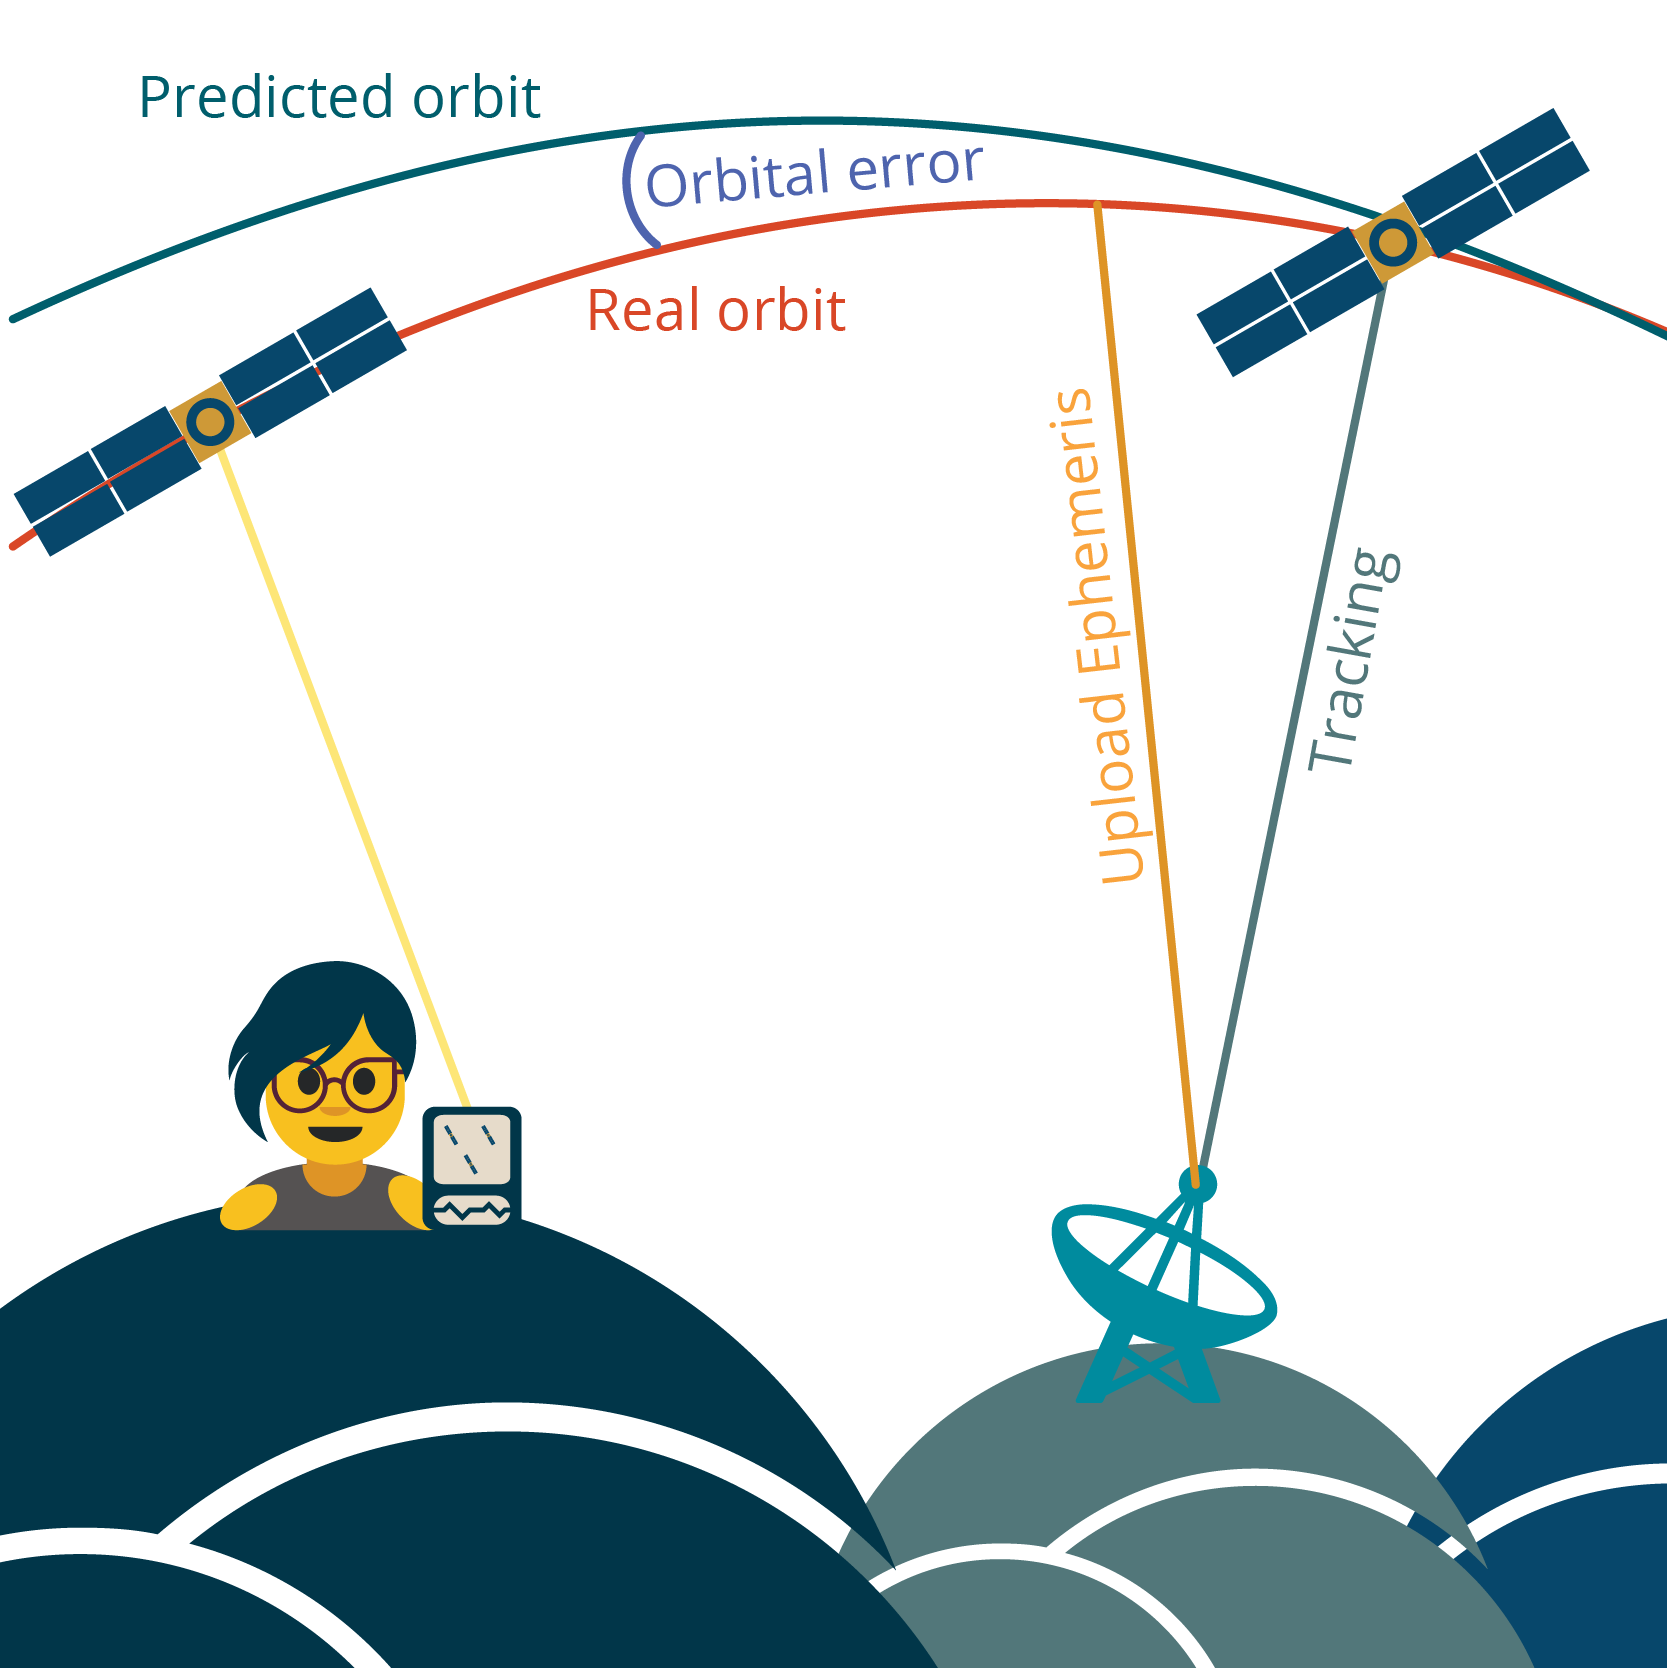 Cartoon character showing predicted orbit and real orbit